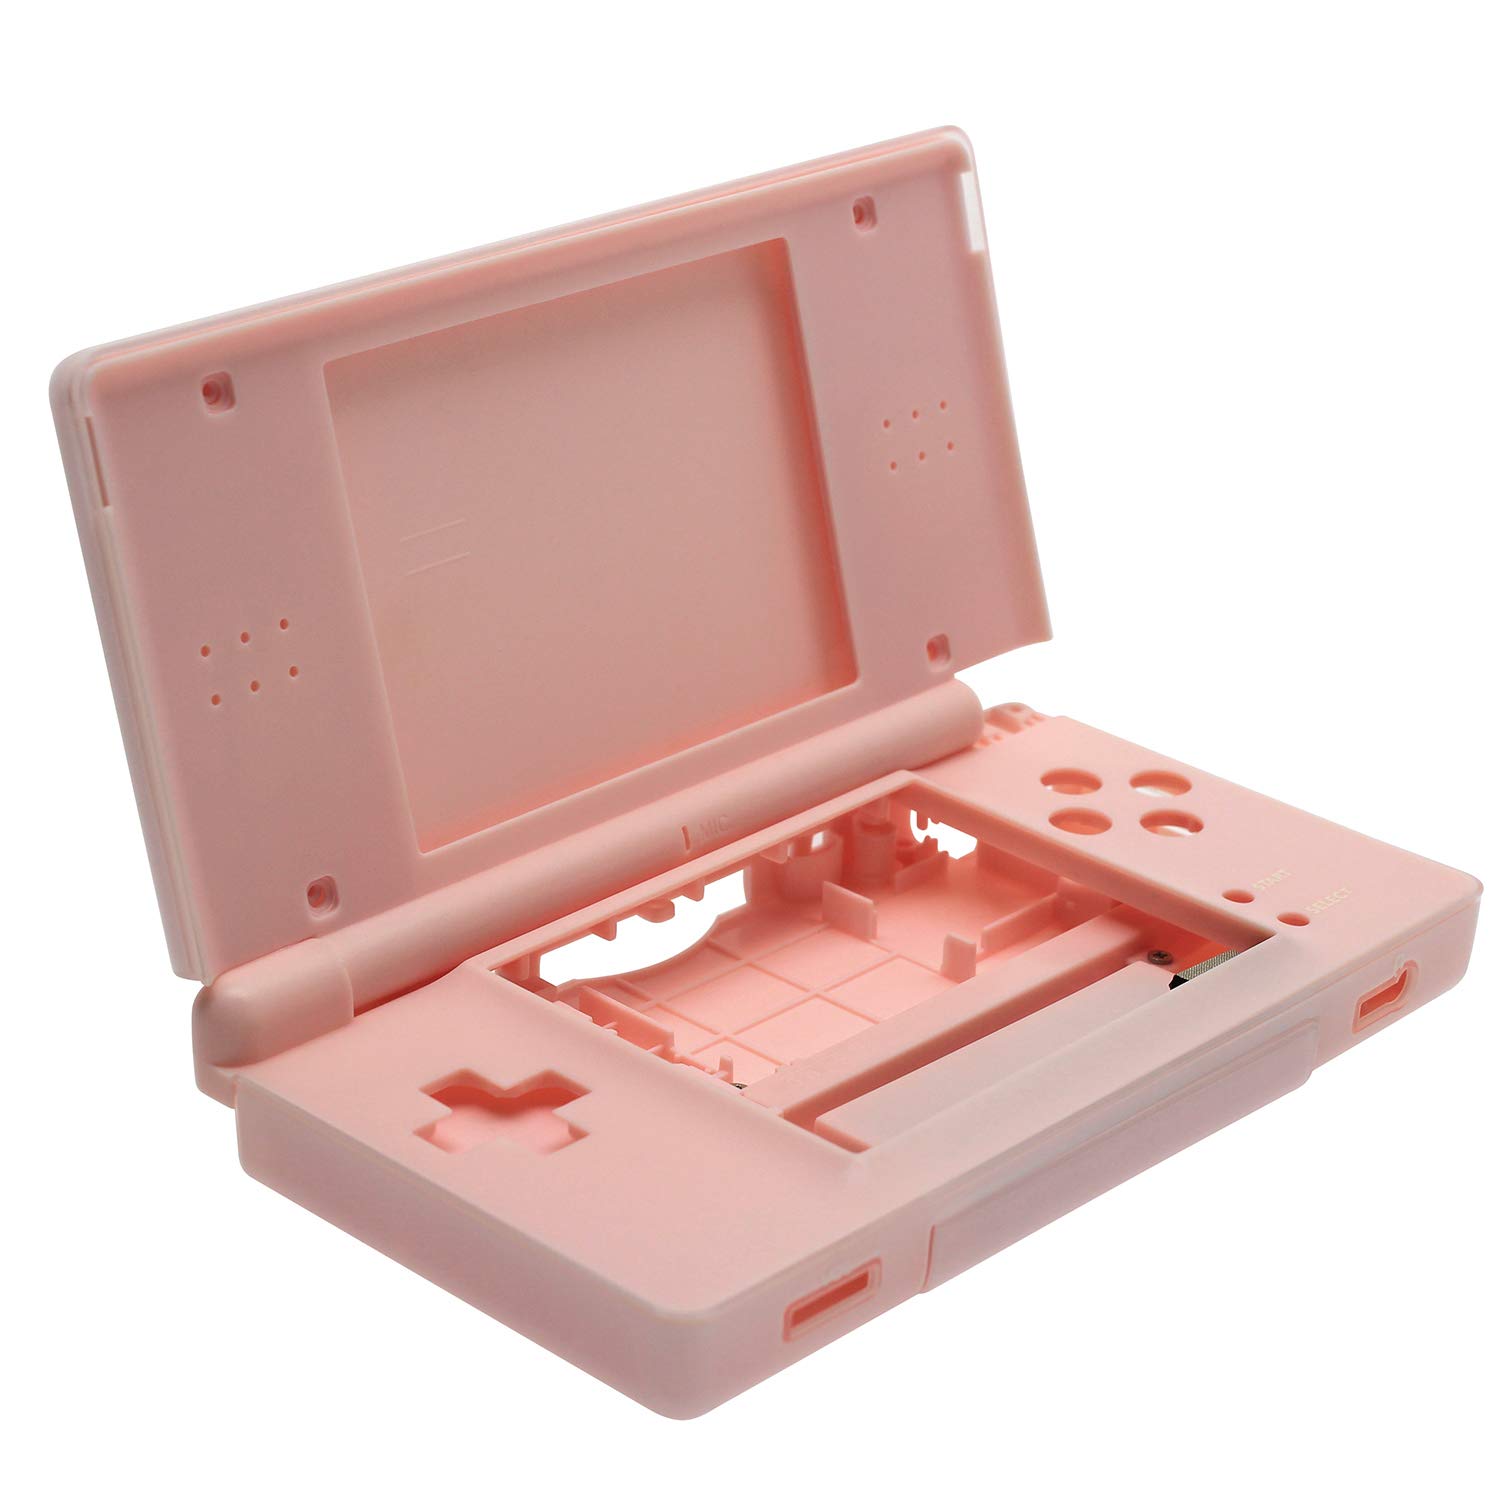 OSTENT Full Repair Parts Replacement Housing Shell Case Kit for Nintendo DS Lite NDSL Color Pink